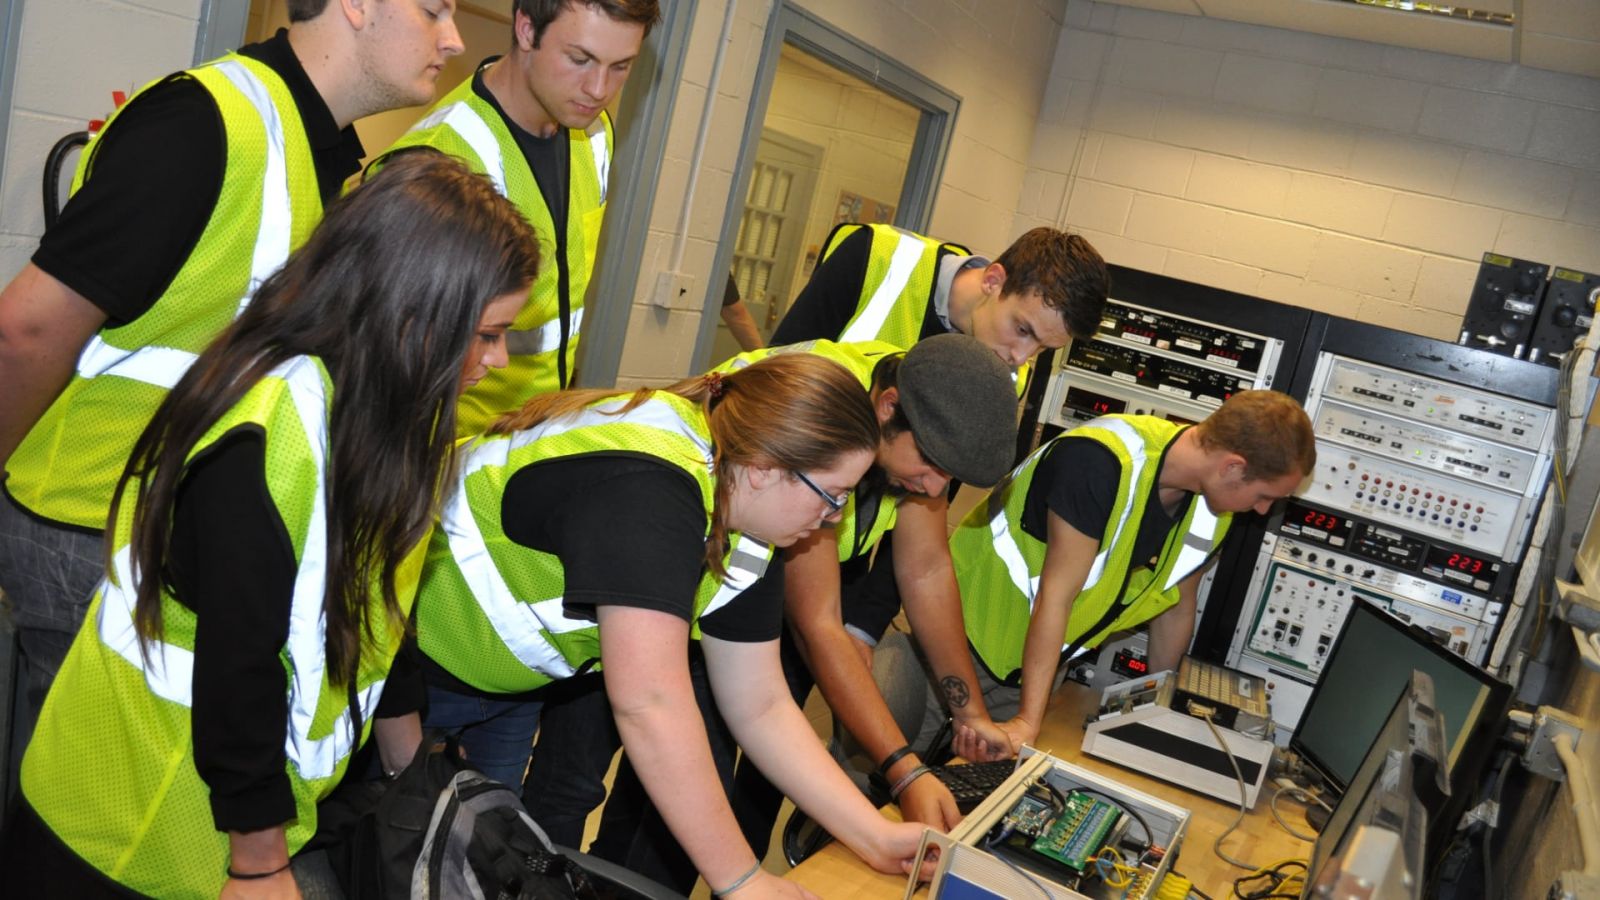 Purdue aviation students collaborate on a compact engine control system with students from the Technical University of Denmark